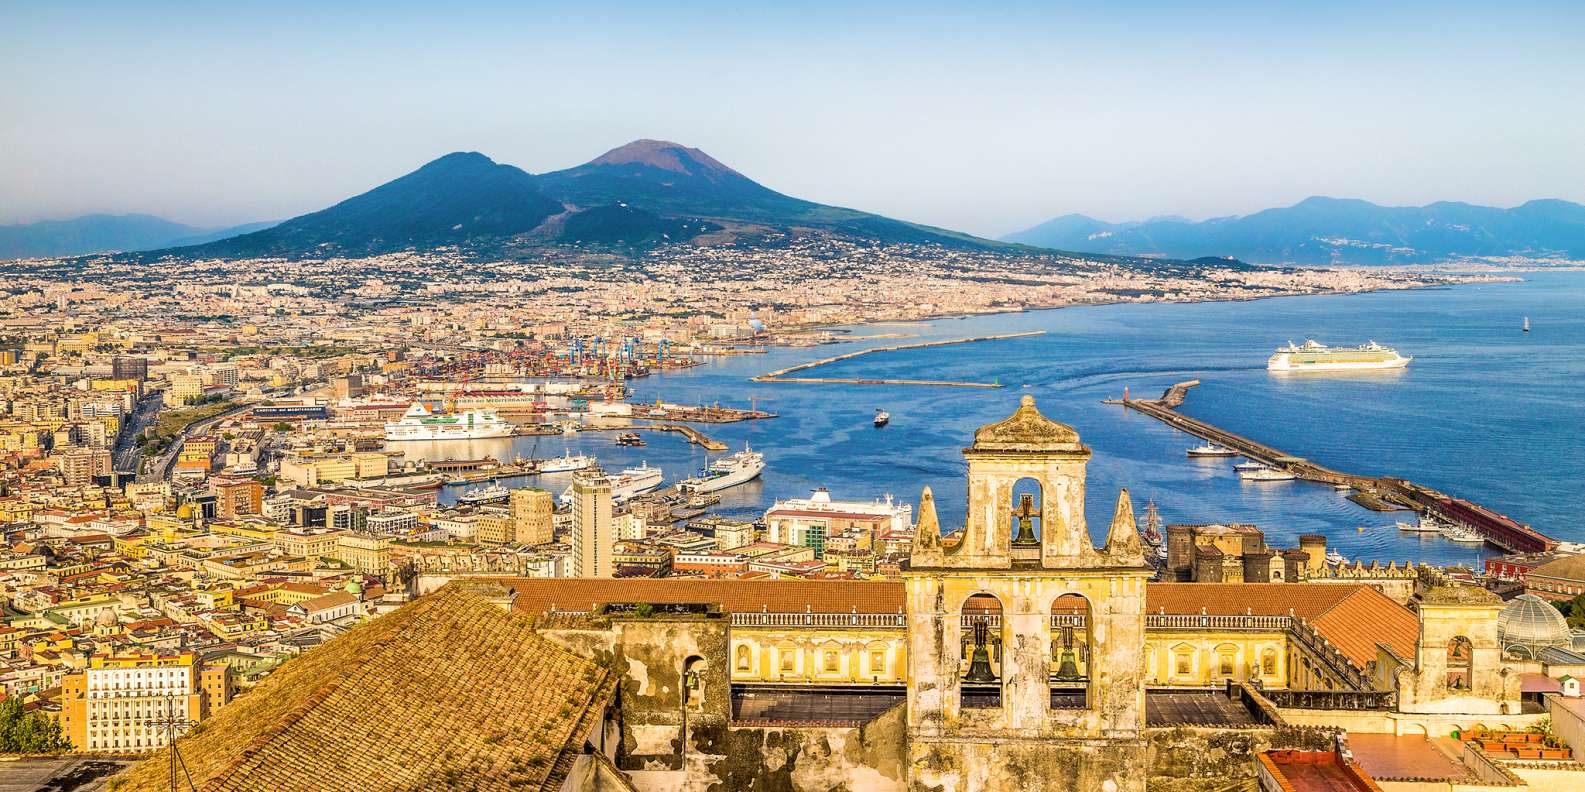 The BEST Naples Culture & history 2024 FREE Cancellation GetYourGuide